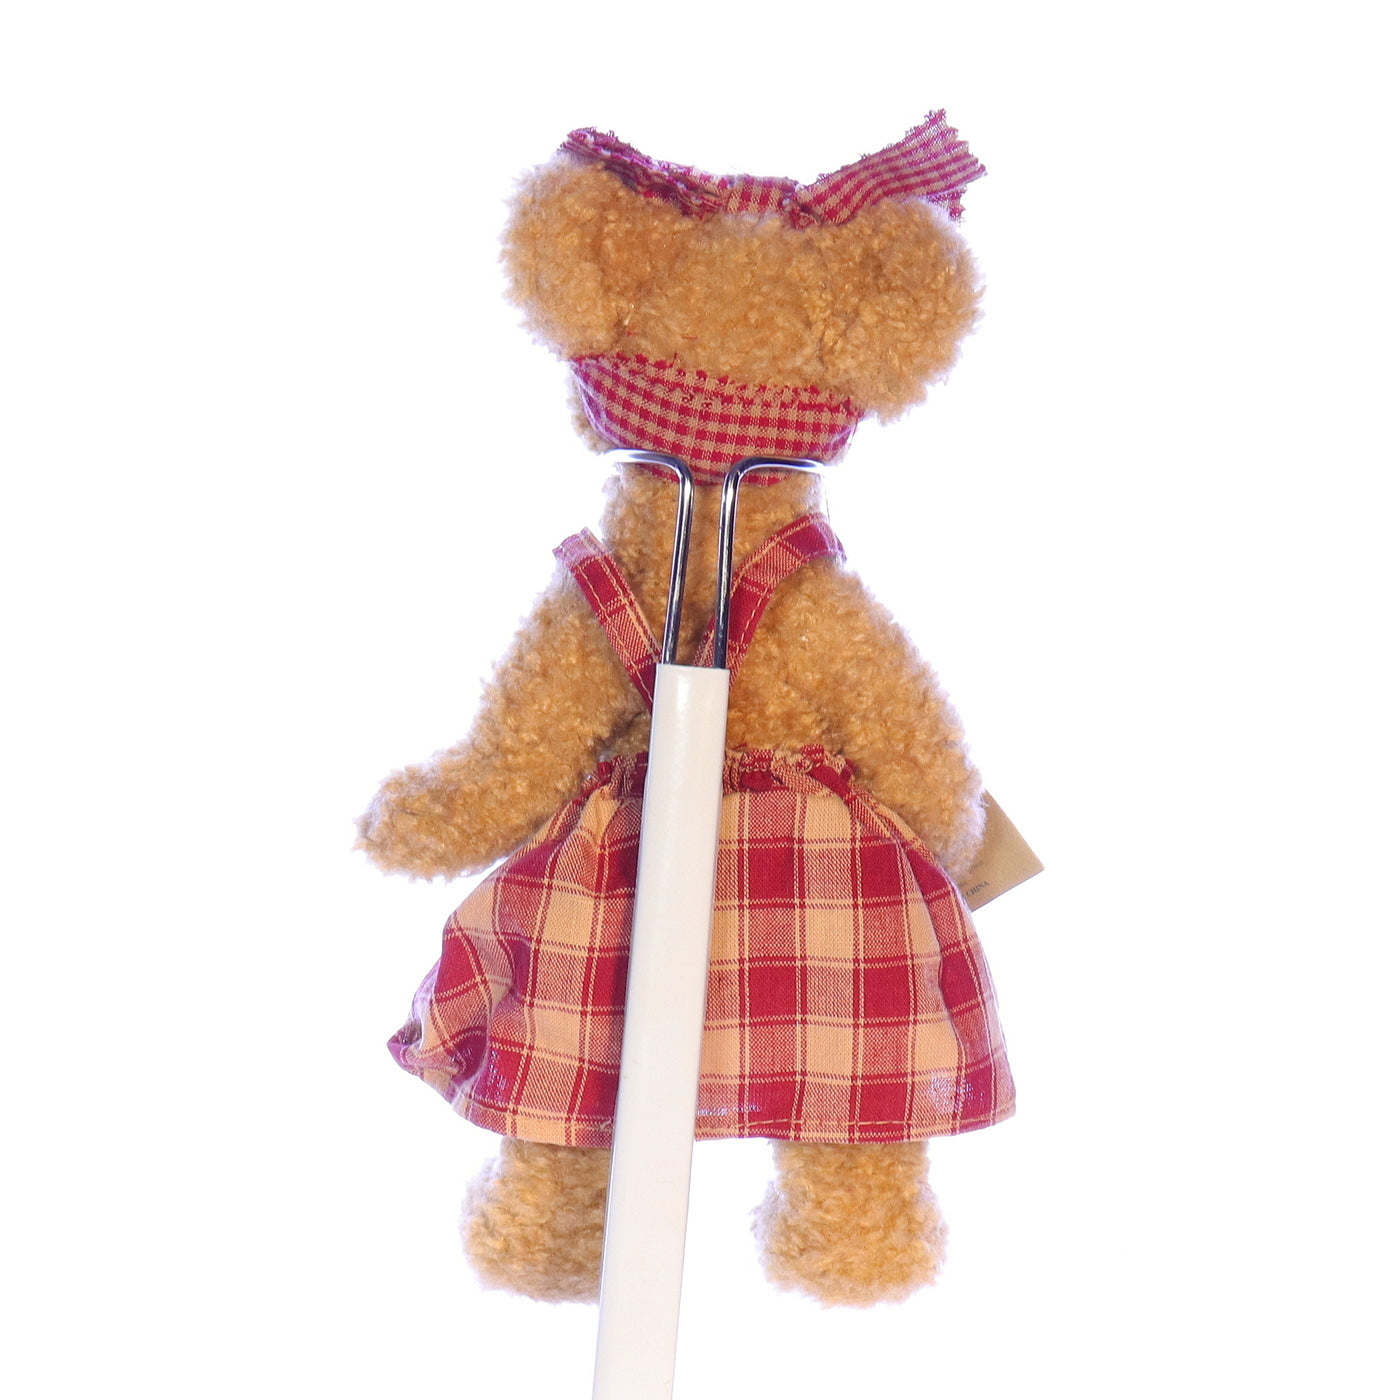 Boyds_Bears_and_Friends_Eudemia_JJ_Bean_and_Associates_Stuffed_Animal_1985 Back View